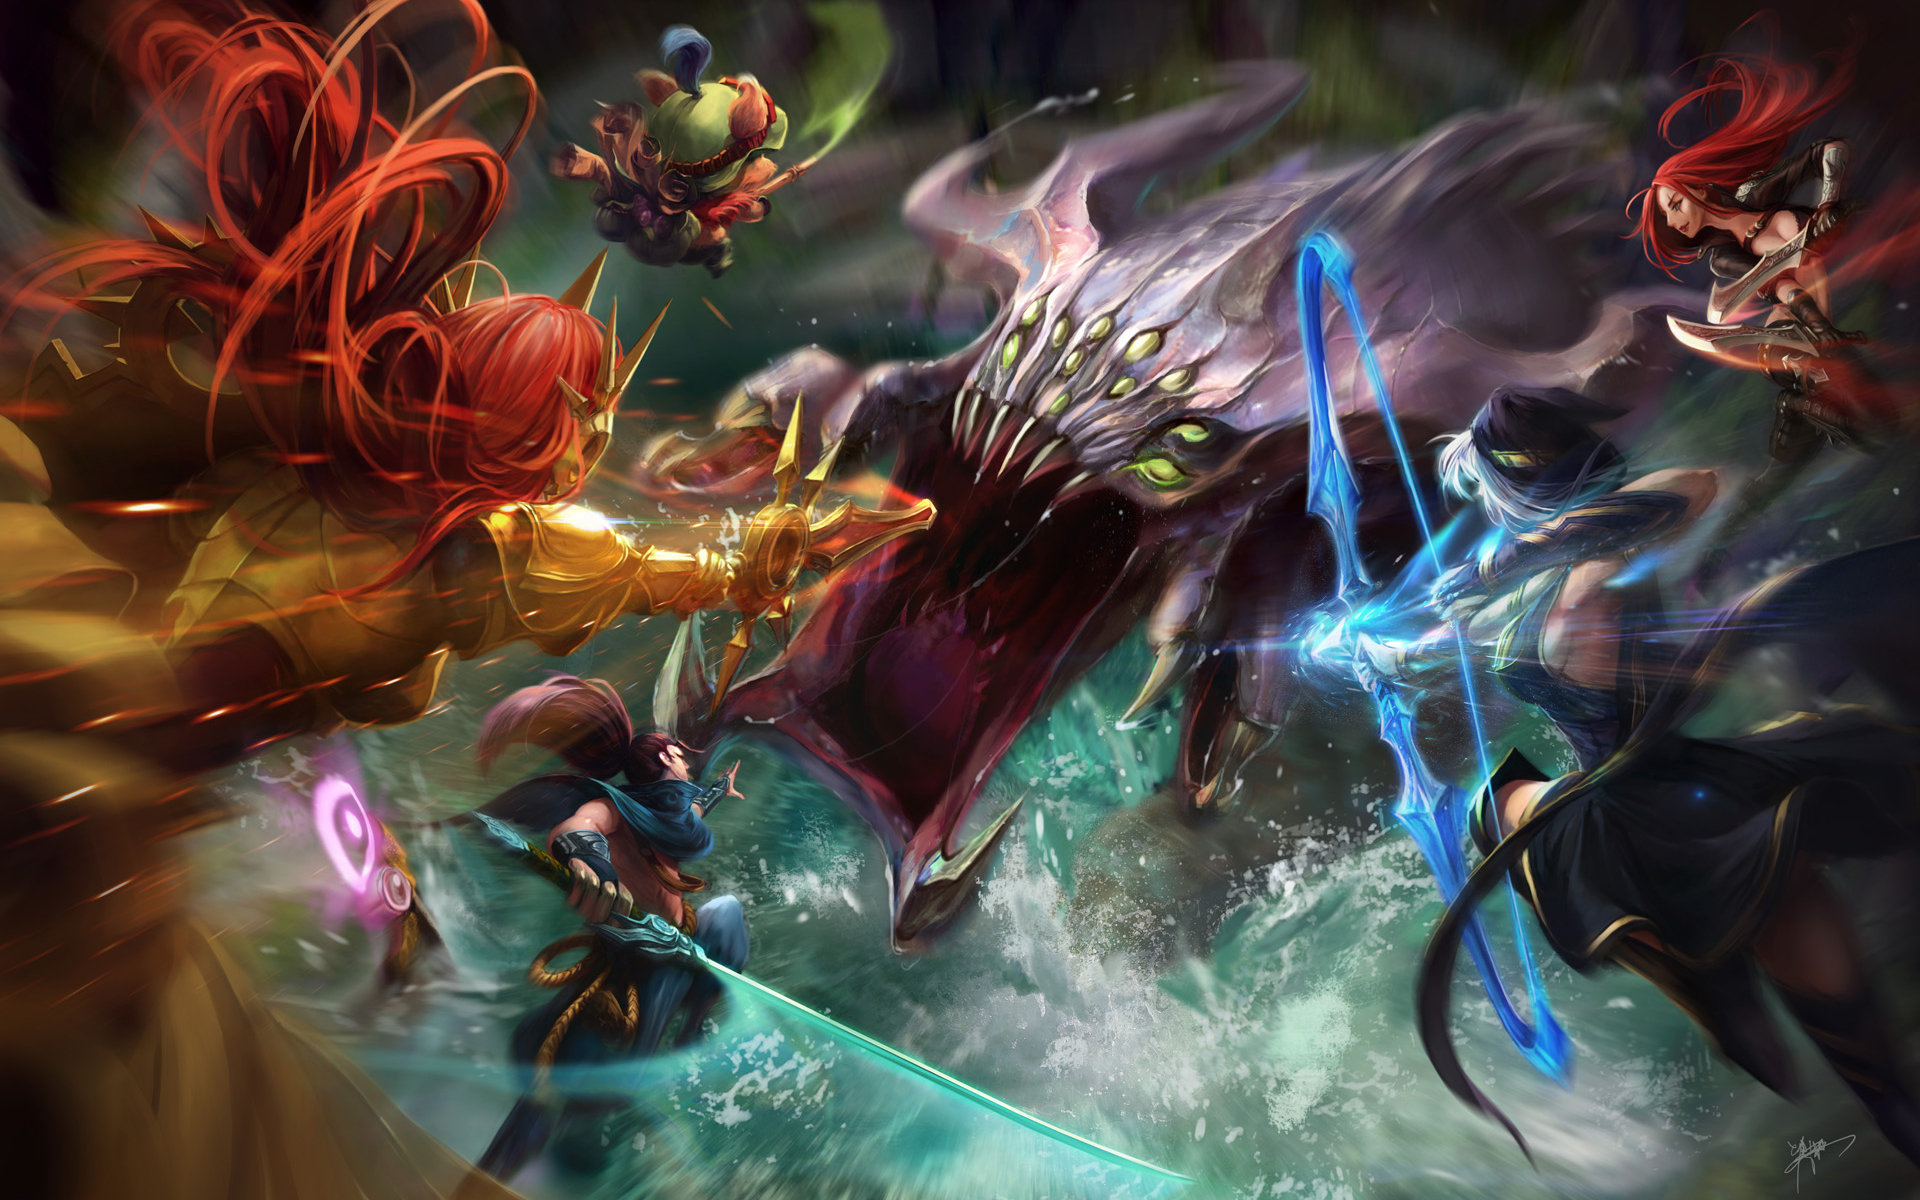 android video game, league of legends, ashe (league of legends), baron nashor (league of legends), katarina (league of legends), leona (league of legends), teemo (league of legends), yasuo (league of legends)